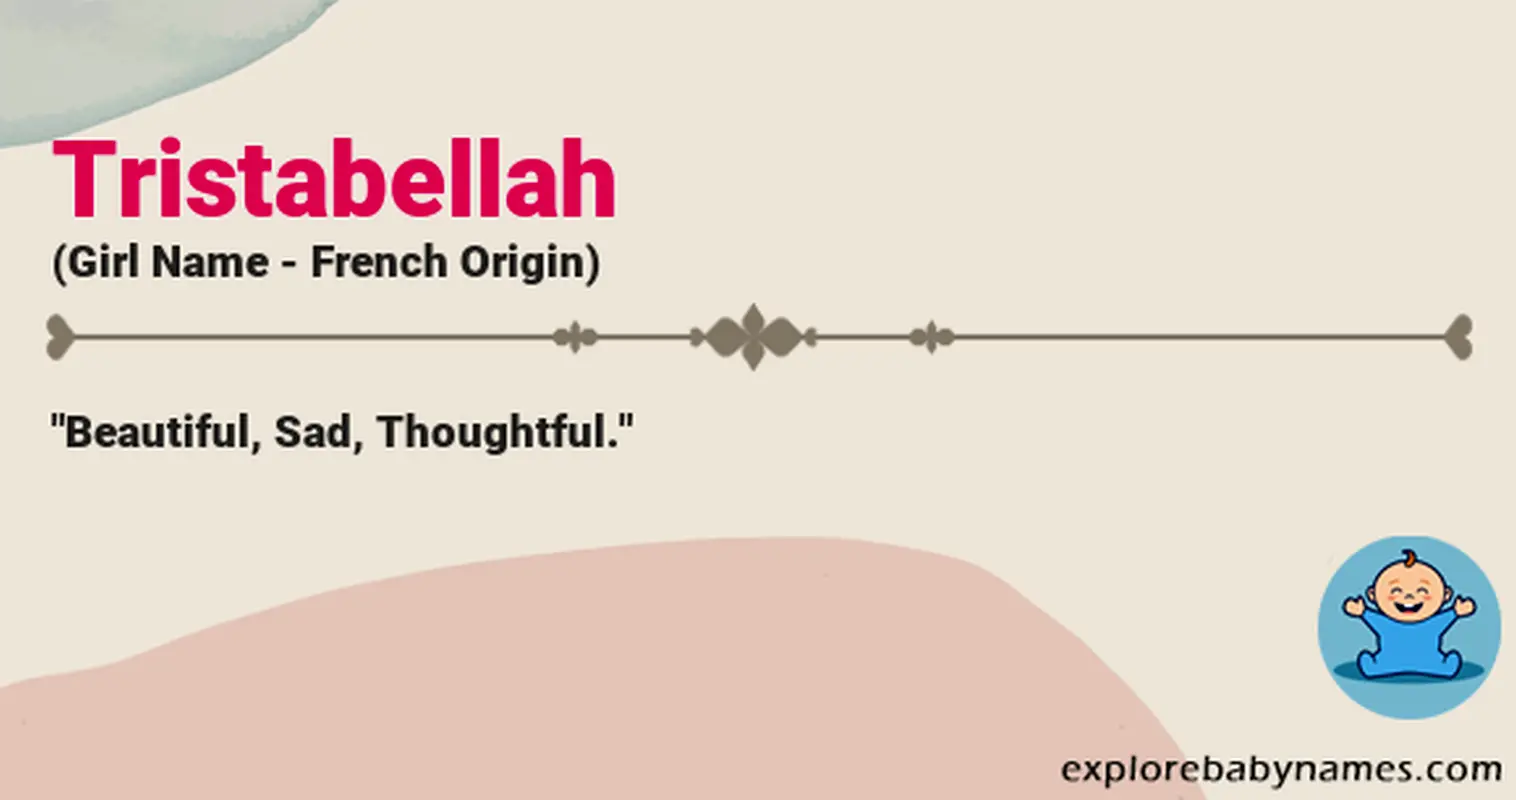 Meaning of Tristabellah